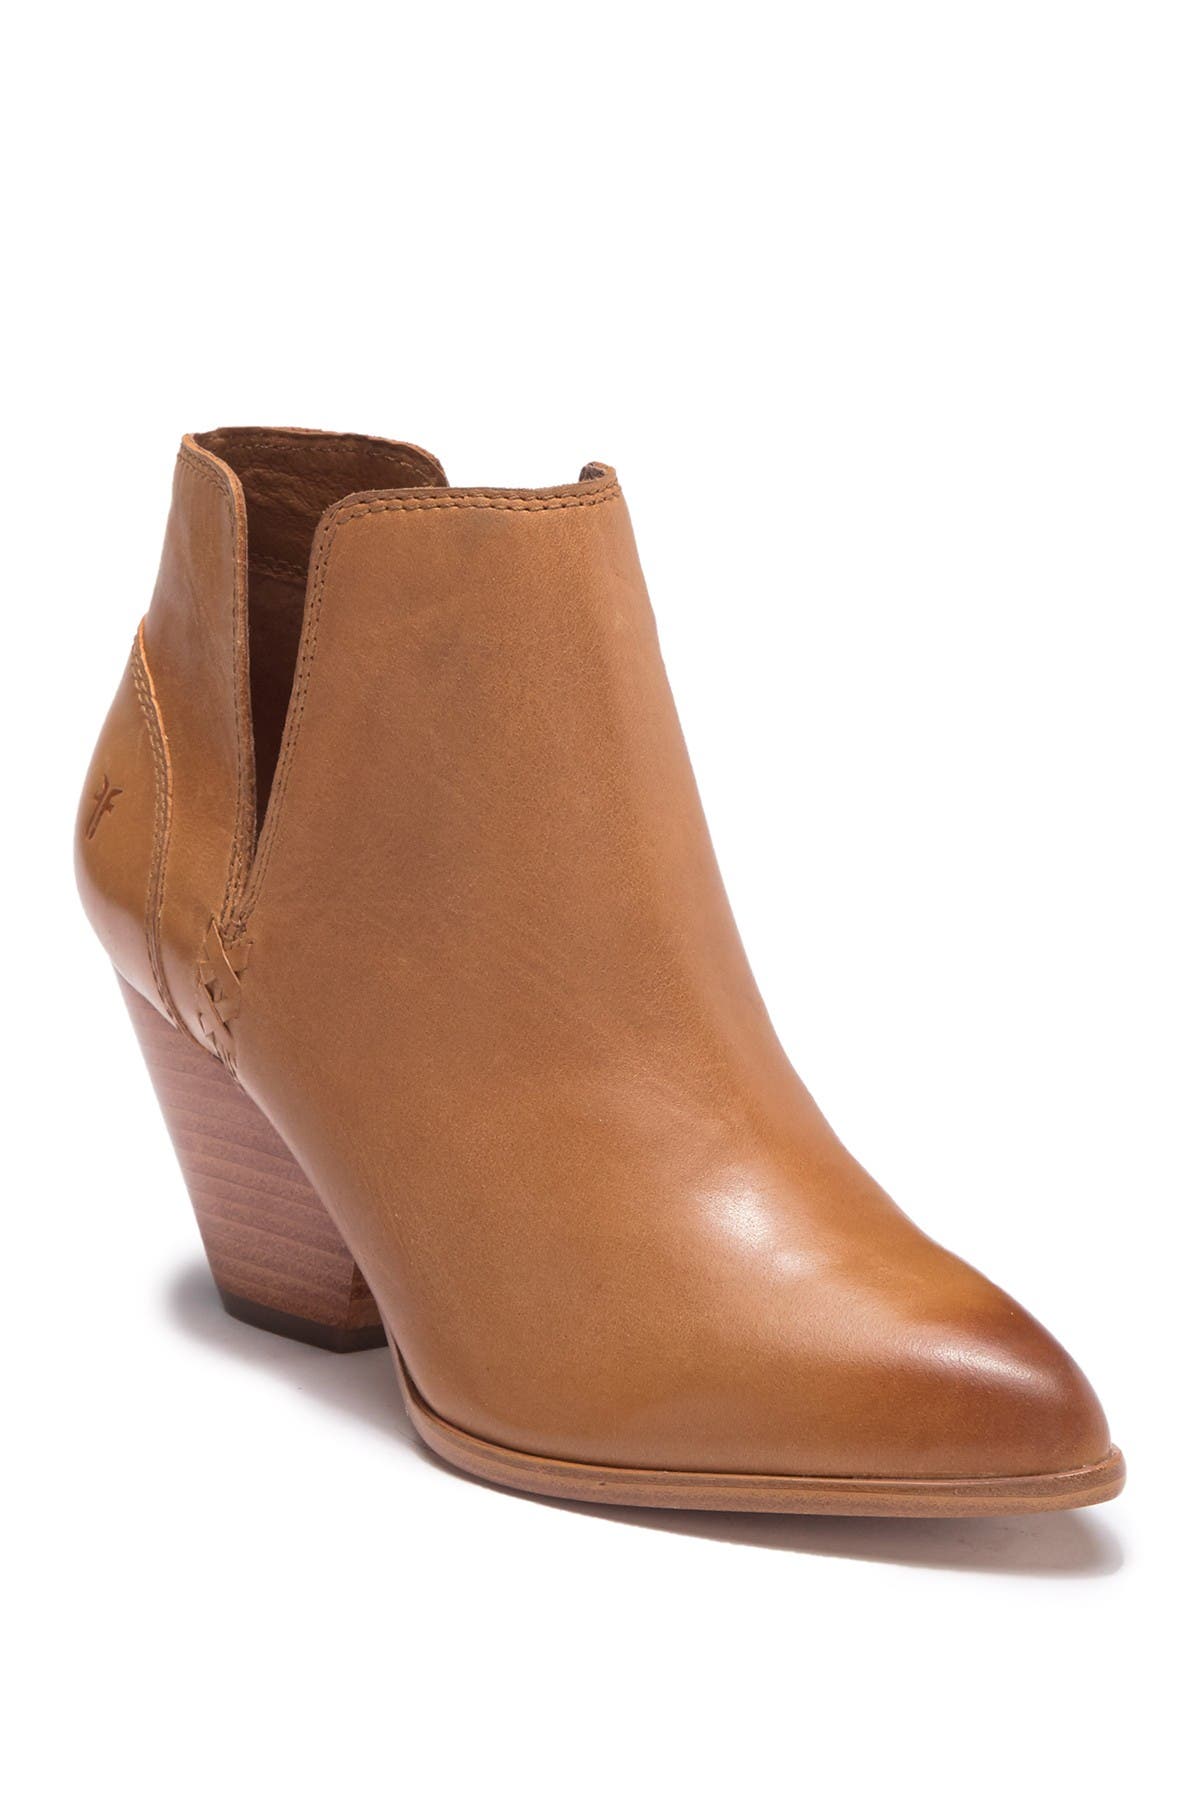 Frye | Reina Leather Cutout Bootie 